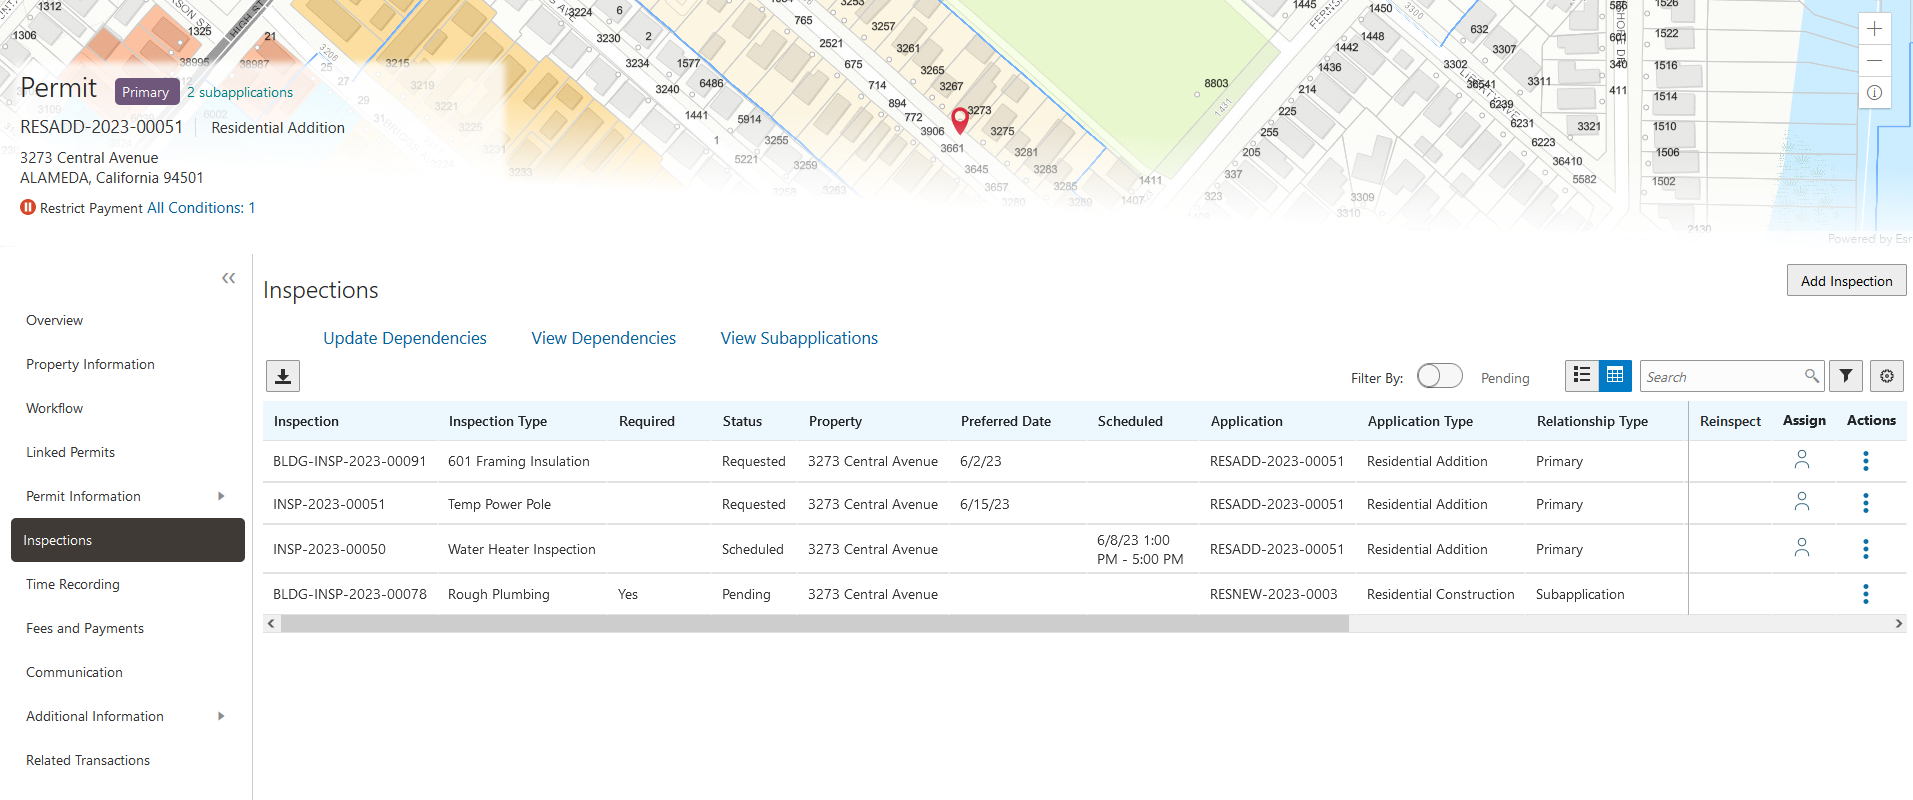 Example of the Inspections page in the permit details